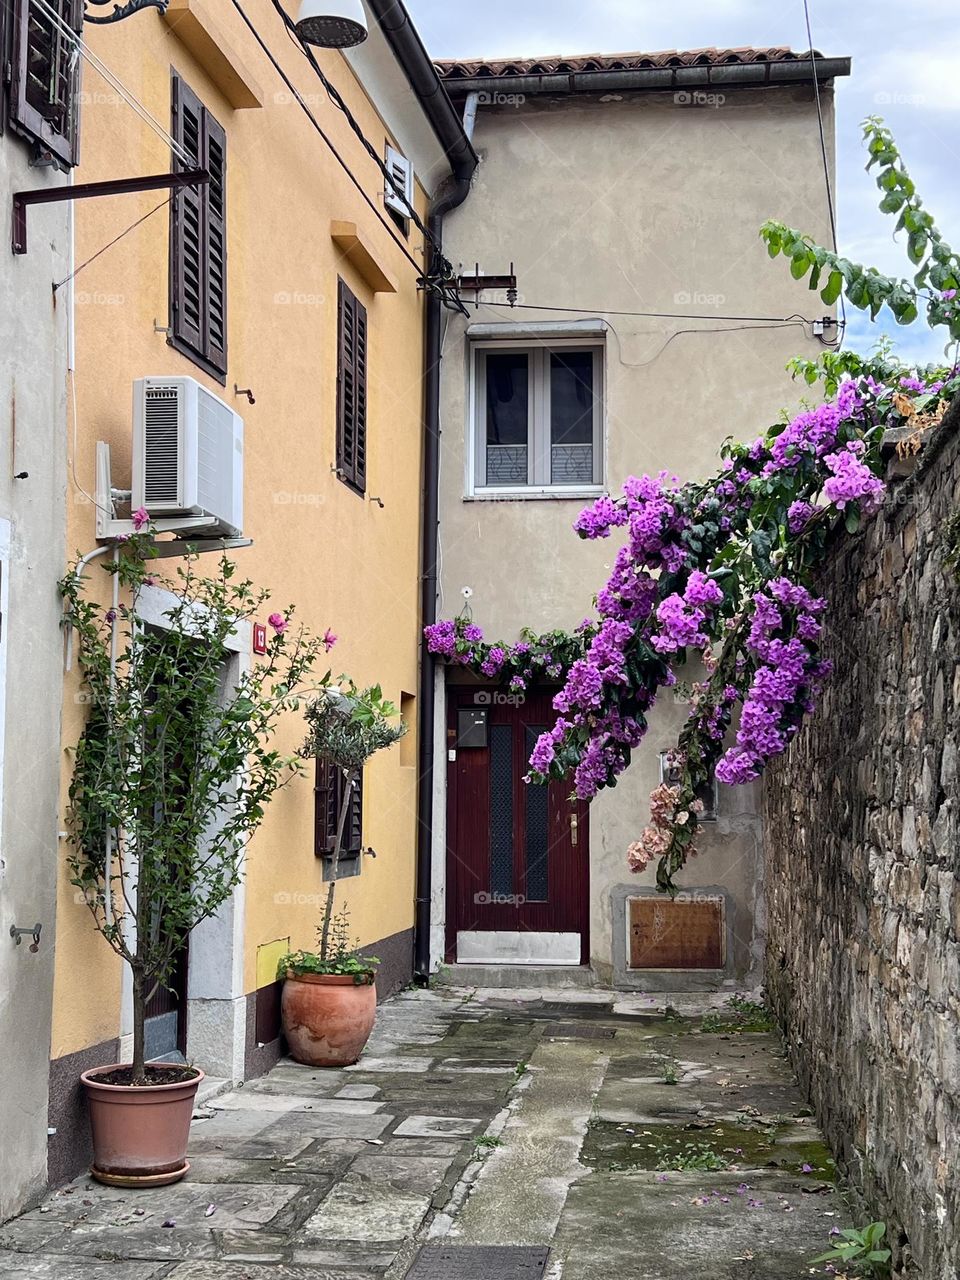 Peaceful walk in the town of Koper, Slovenia. A quiet moment on a colorful Sunday morning. 